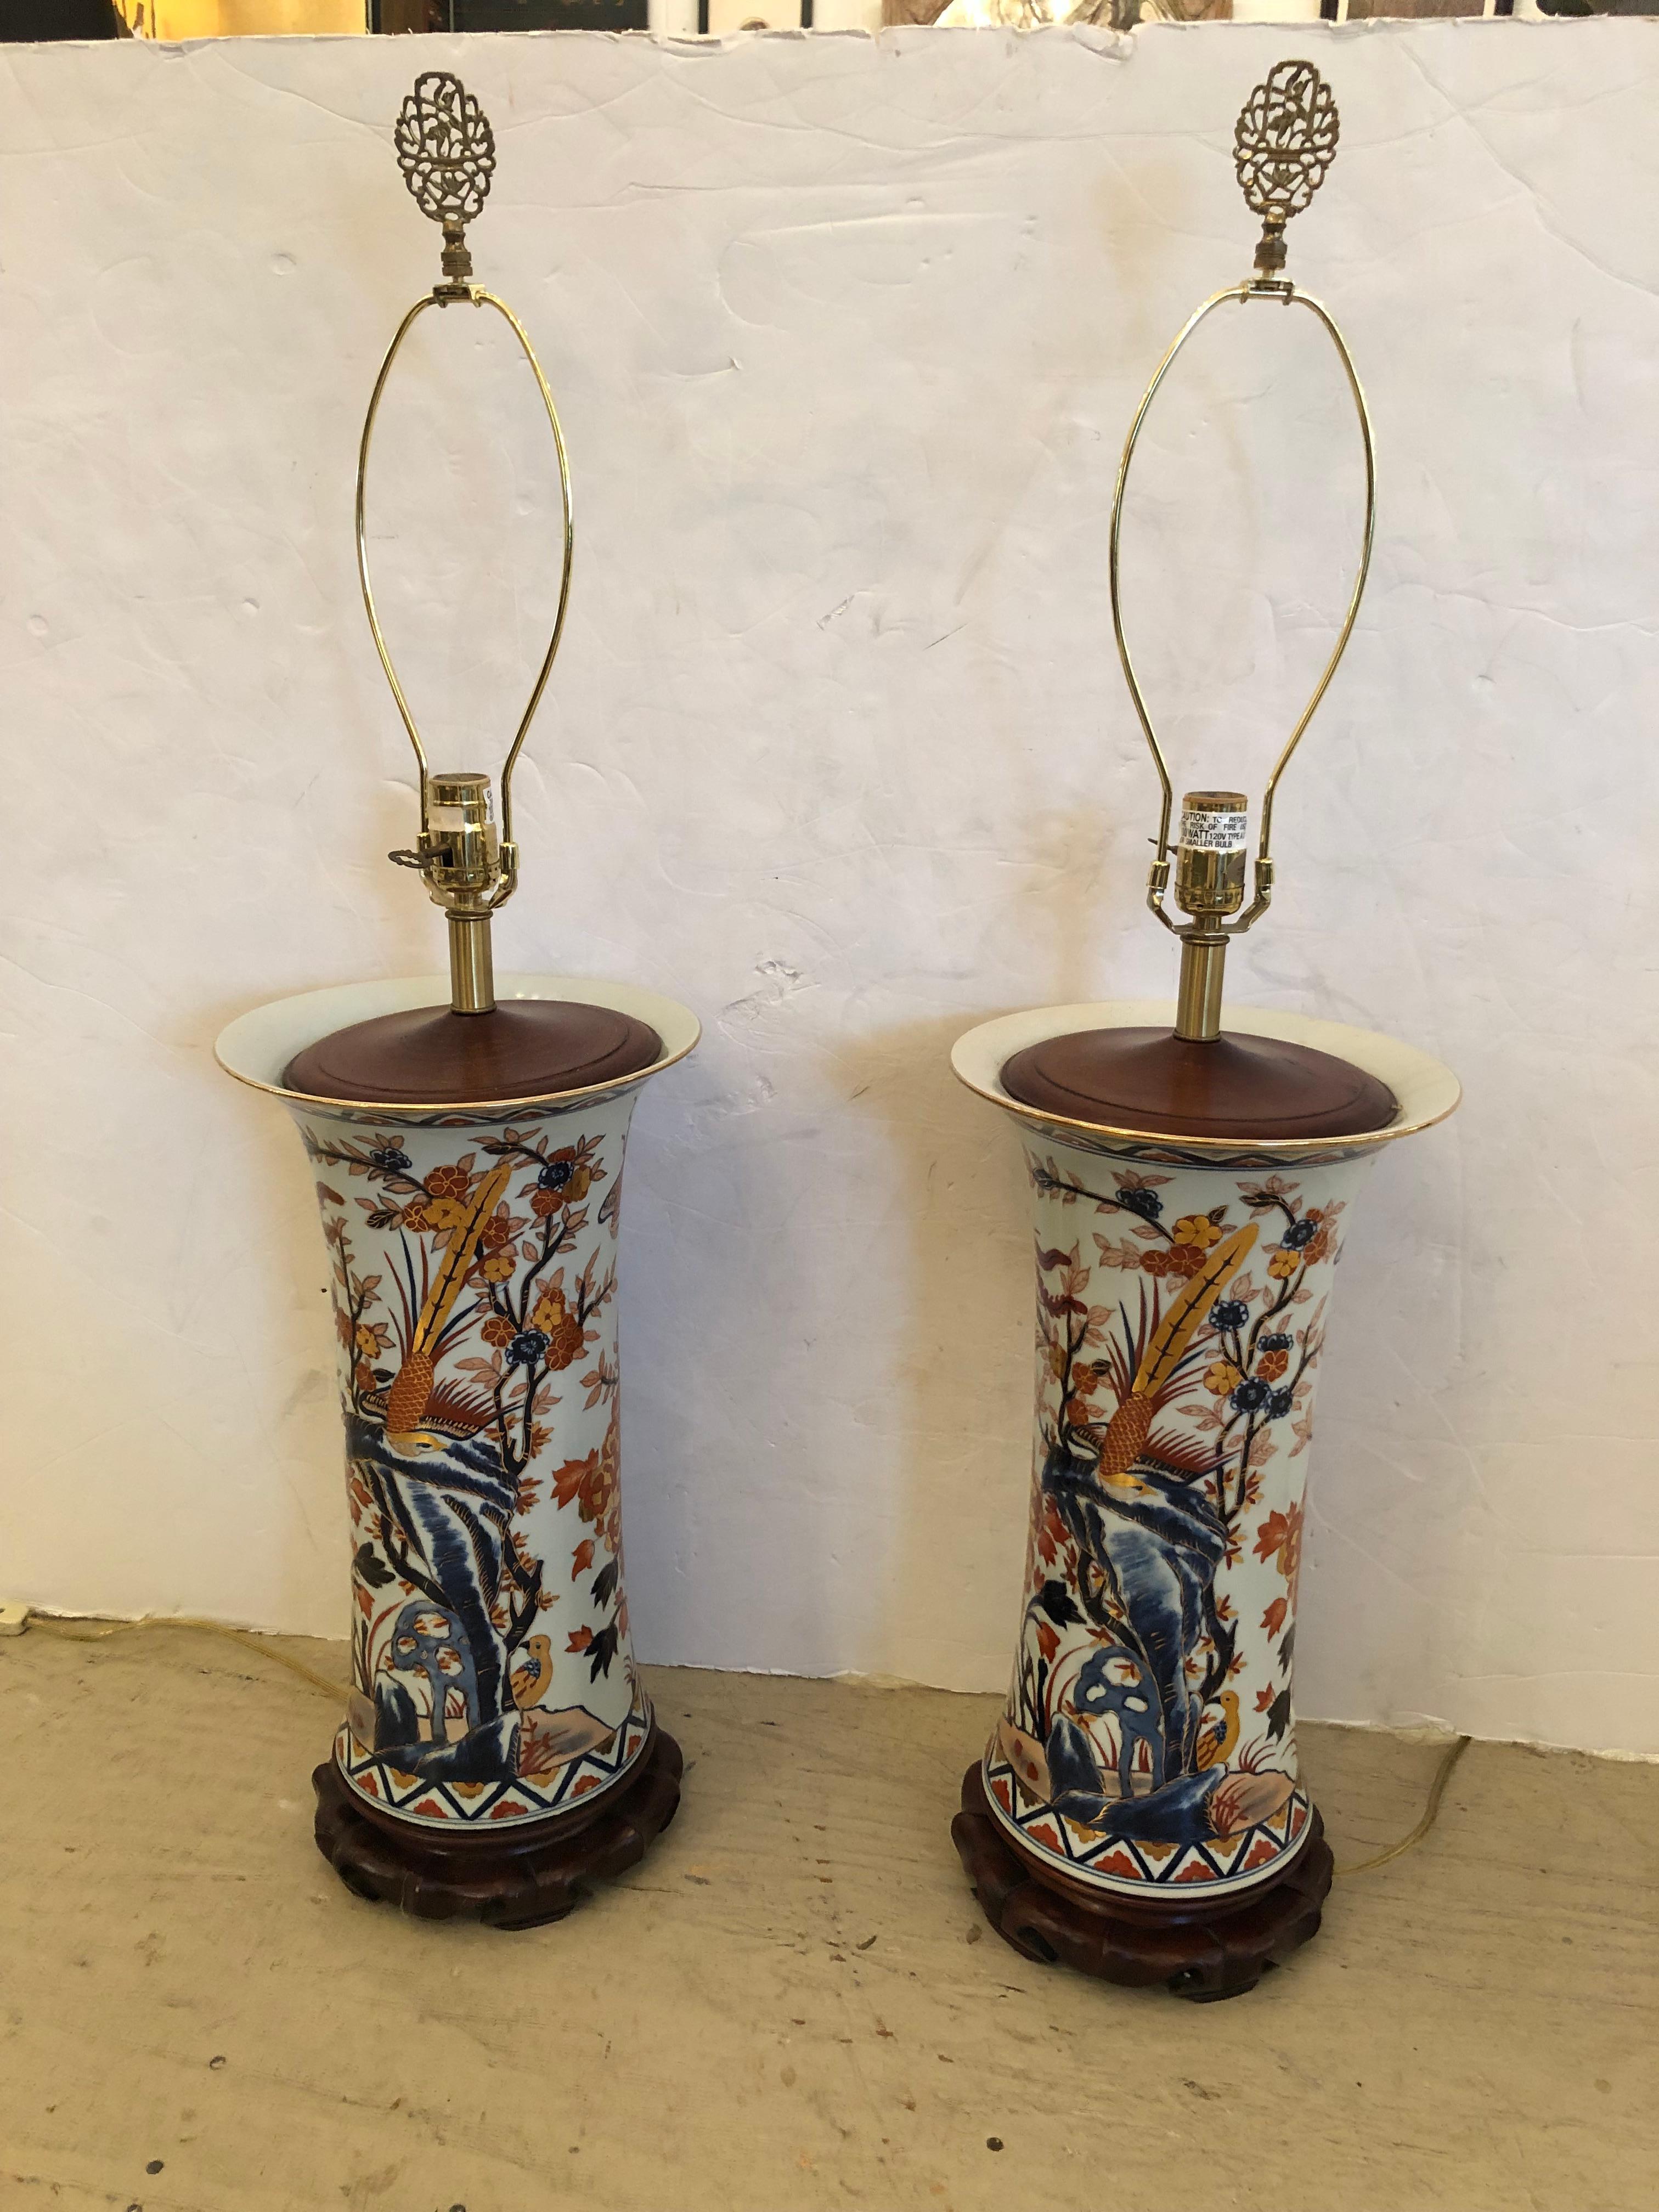 Large impressive and beautiful pair of vintage cylindrical Chinese table lamps having stunning decoration with birds and foliage in navy blue, burnt orange and gold against a white background.  Handsome dark wood bases and custom contemporary